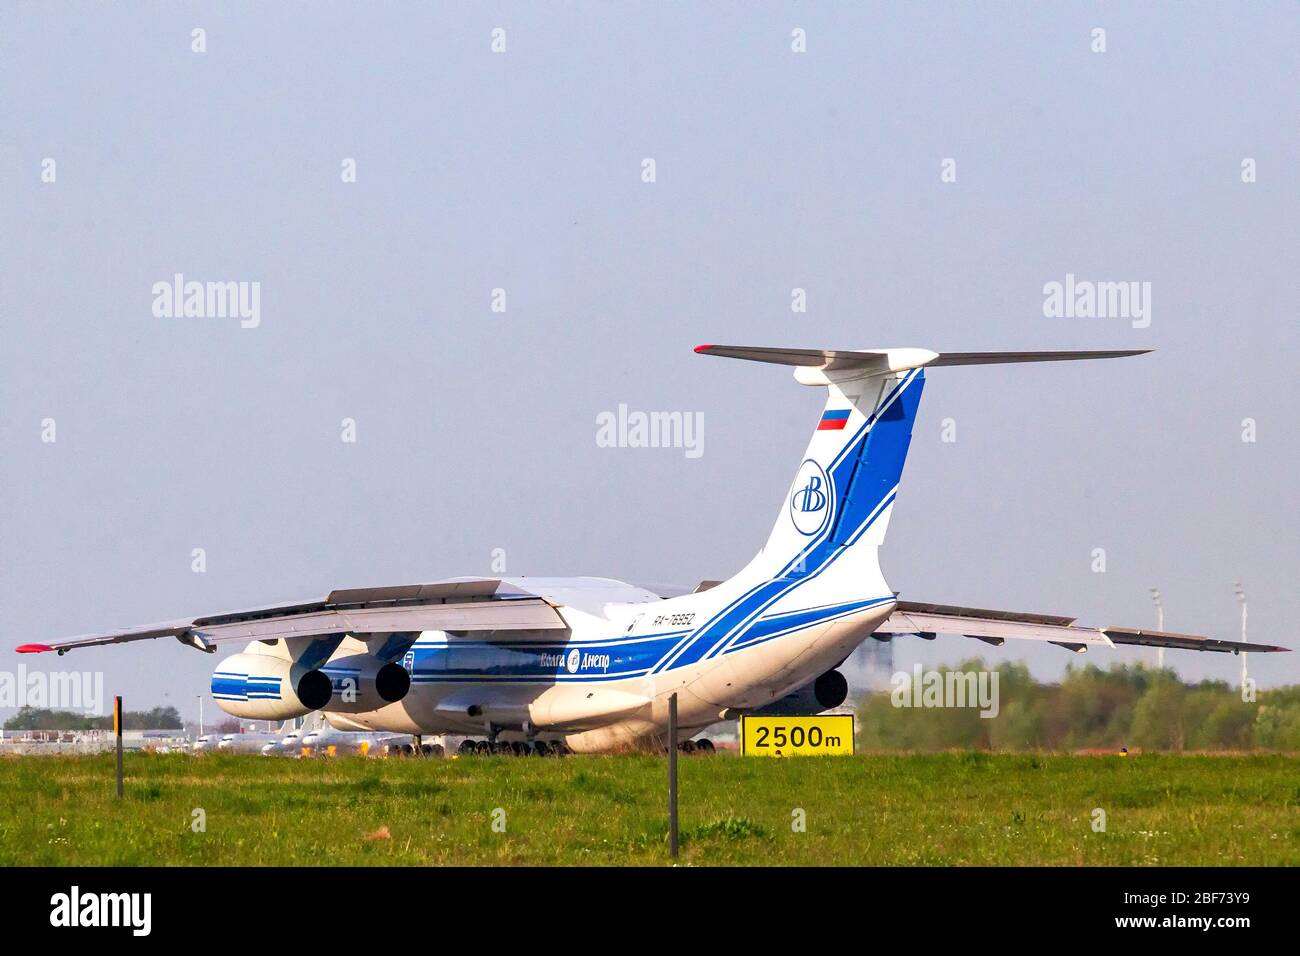 16 april 2020 Maastricht, The Netherlands Airplanes leaving the Airport Iljoesin IL76TD-90 VD cargo vliegtuig Iljoesin IL76TD-90 VD cargo plane Stock Photo